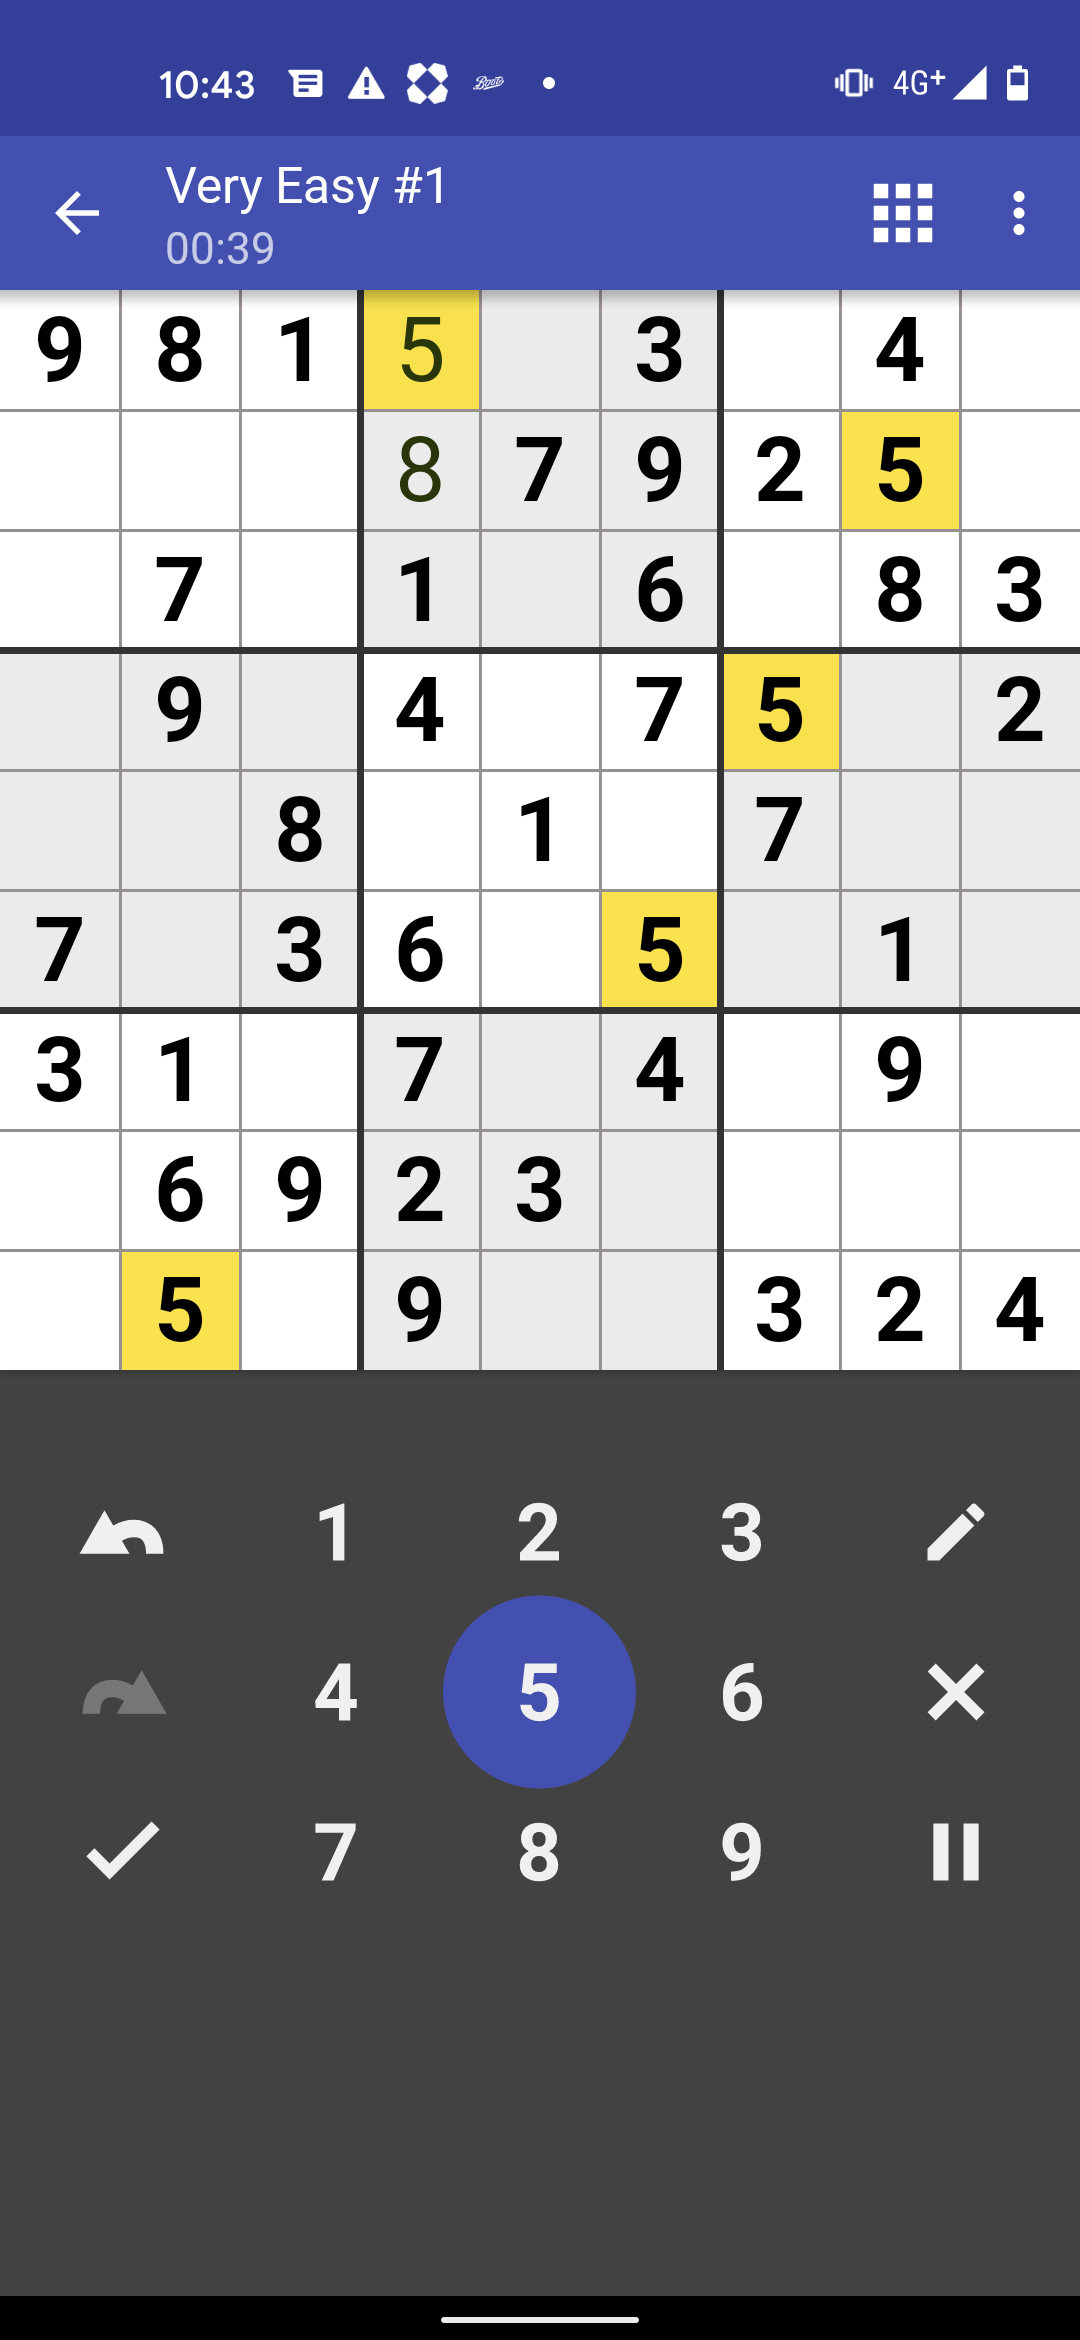 What are the best free sudoku apps? - Quora